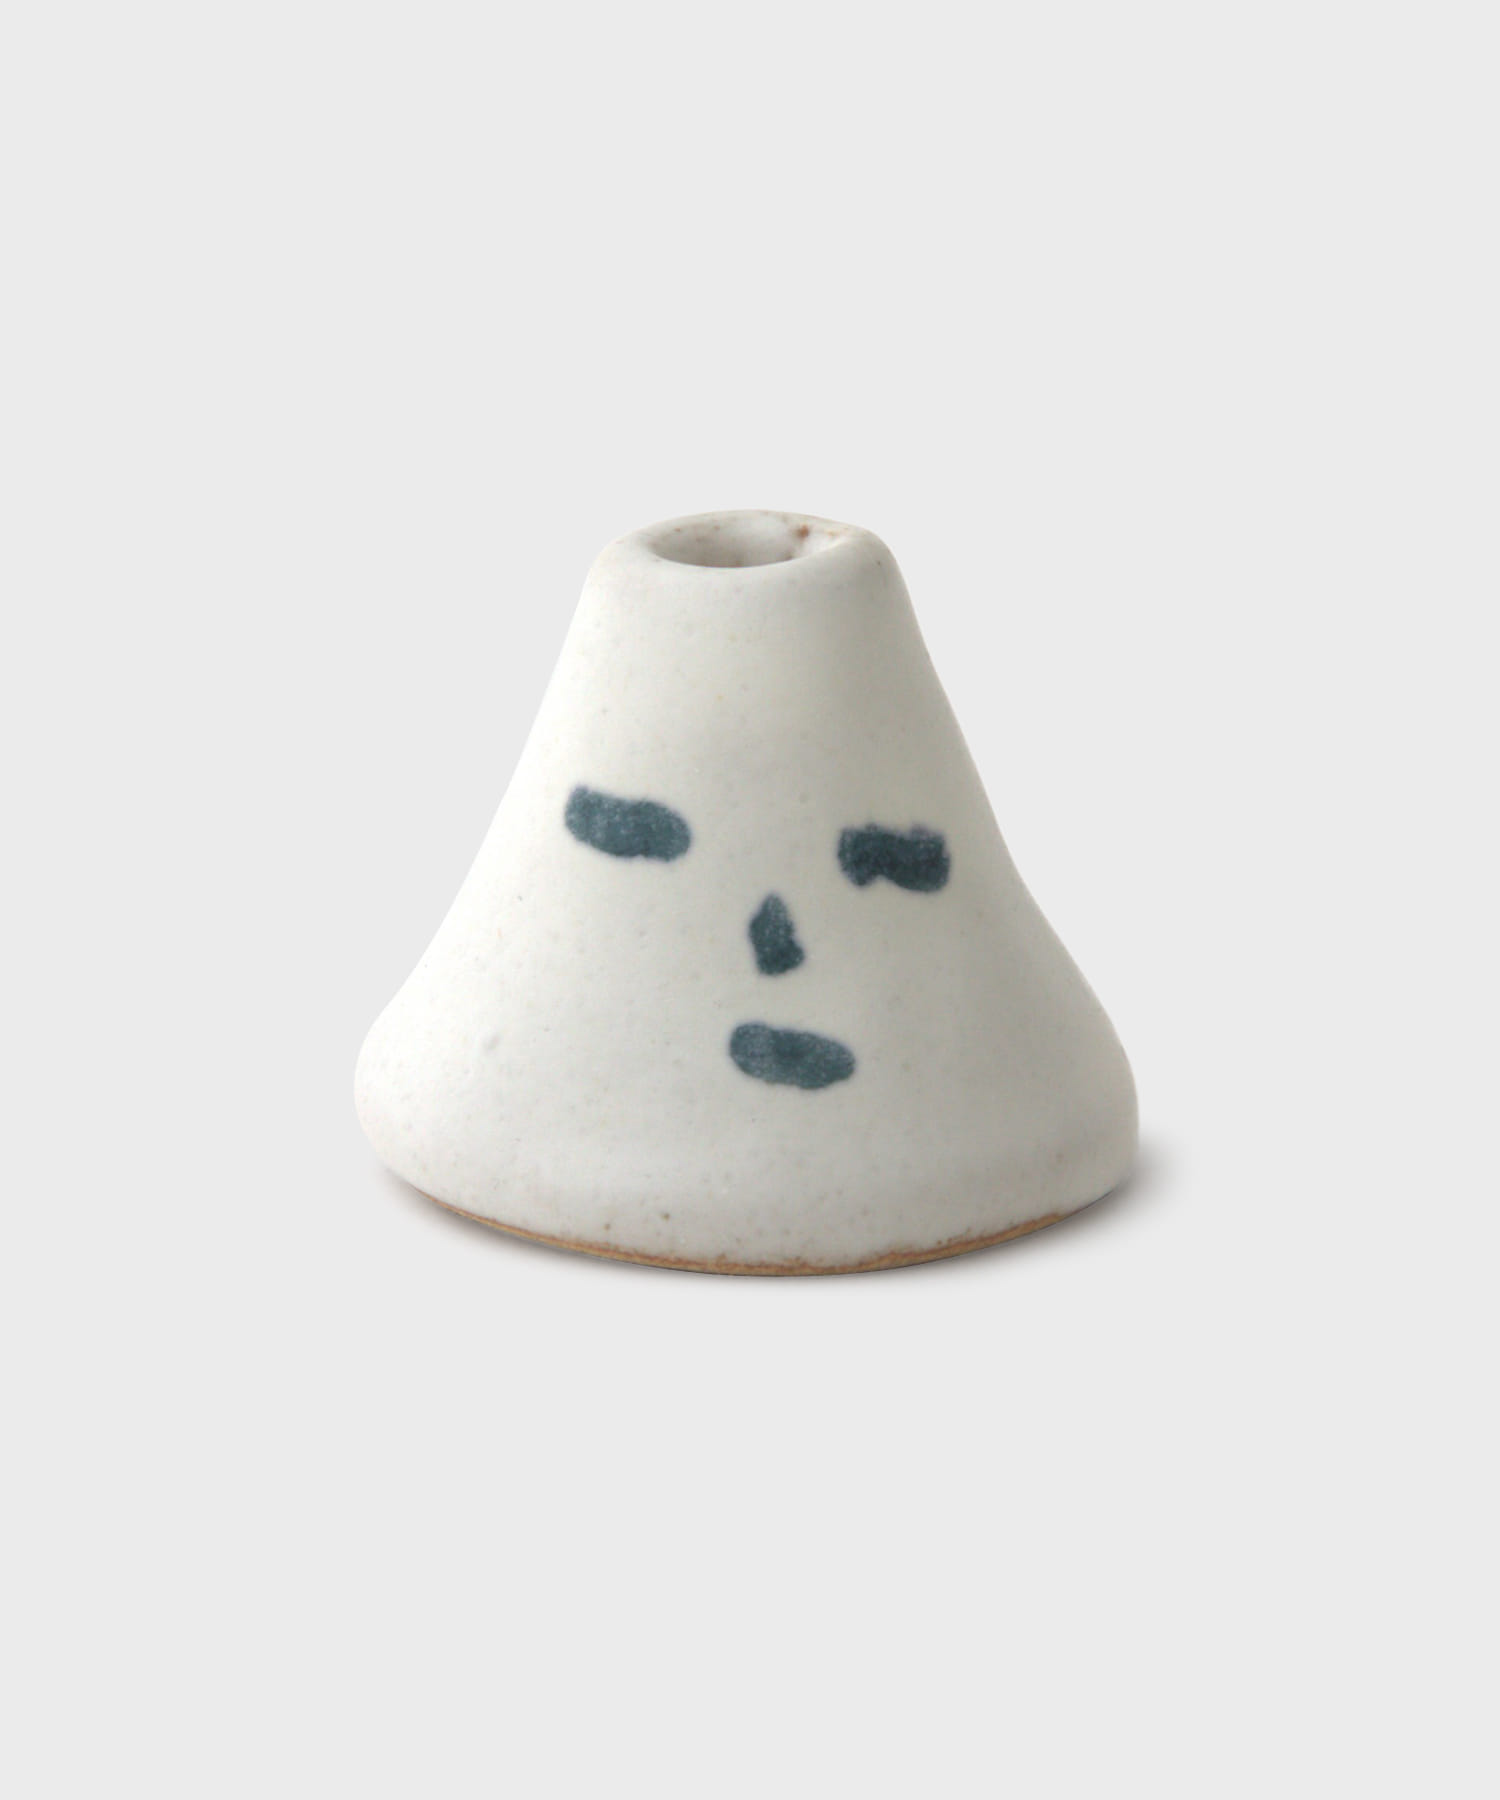 Conic Head Incense Holder